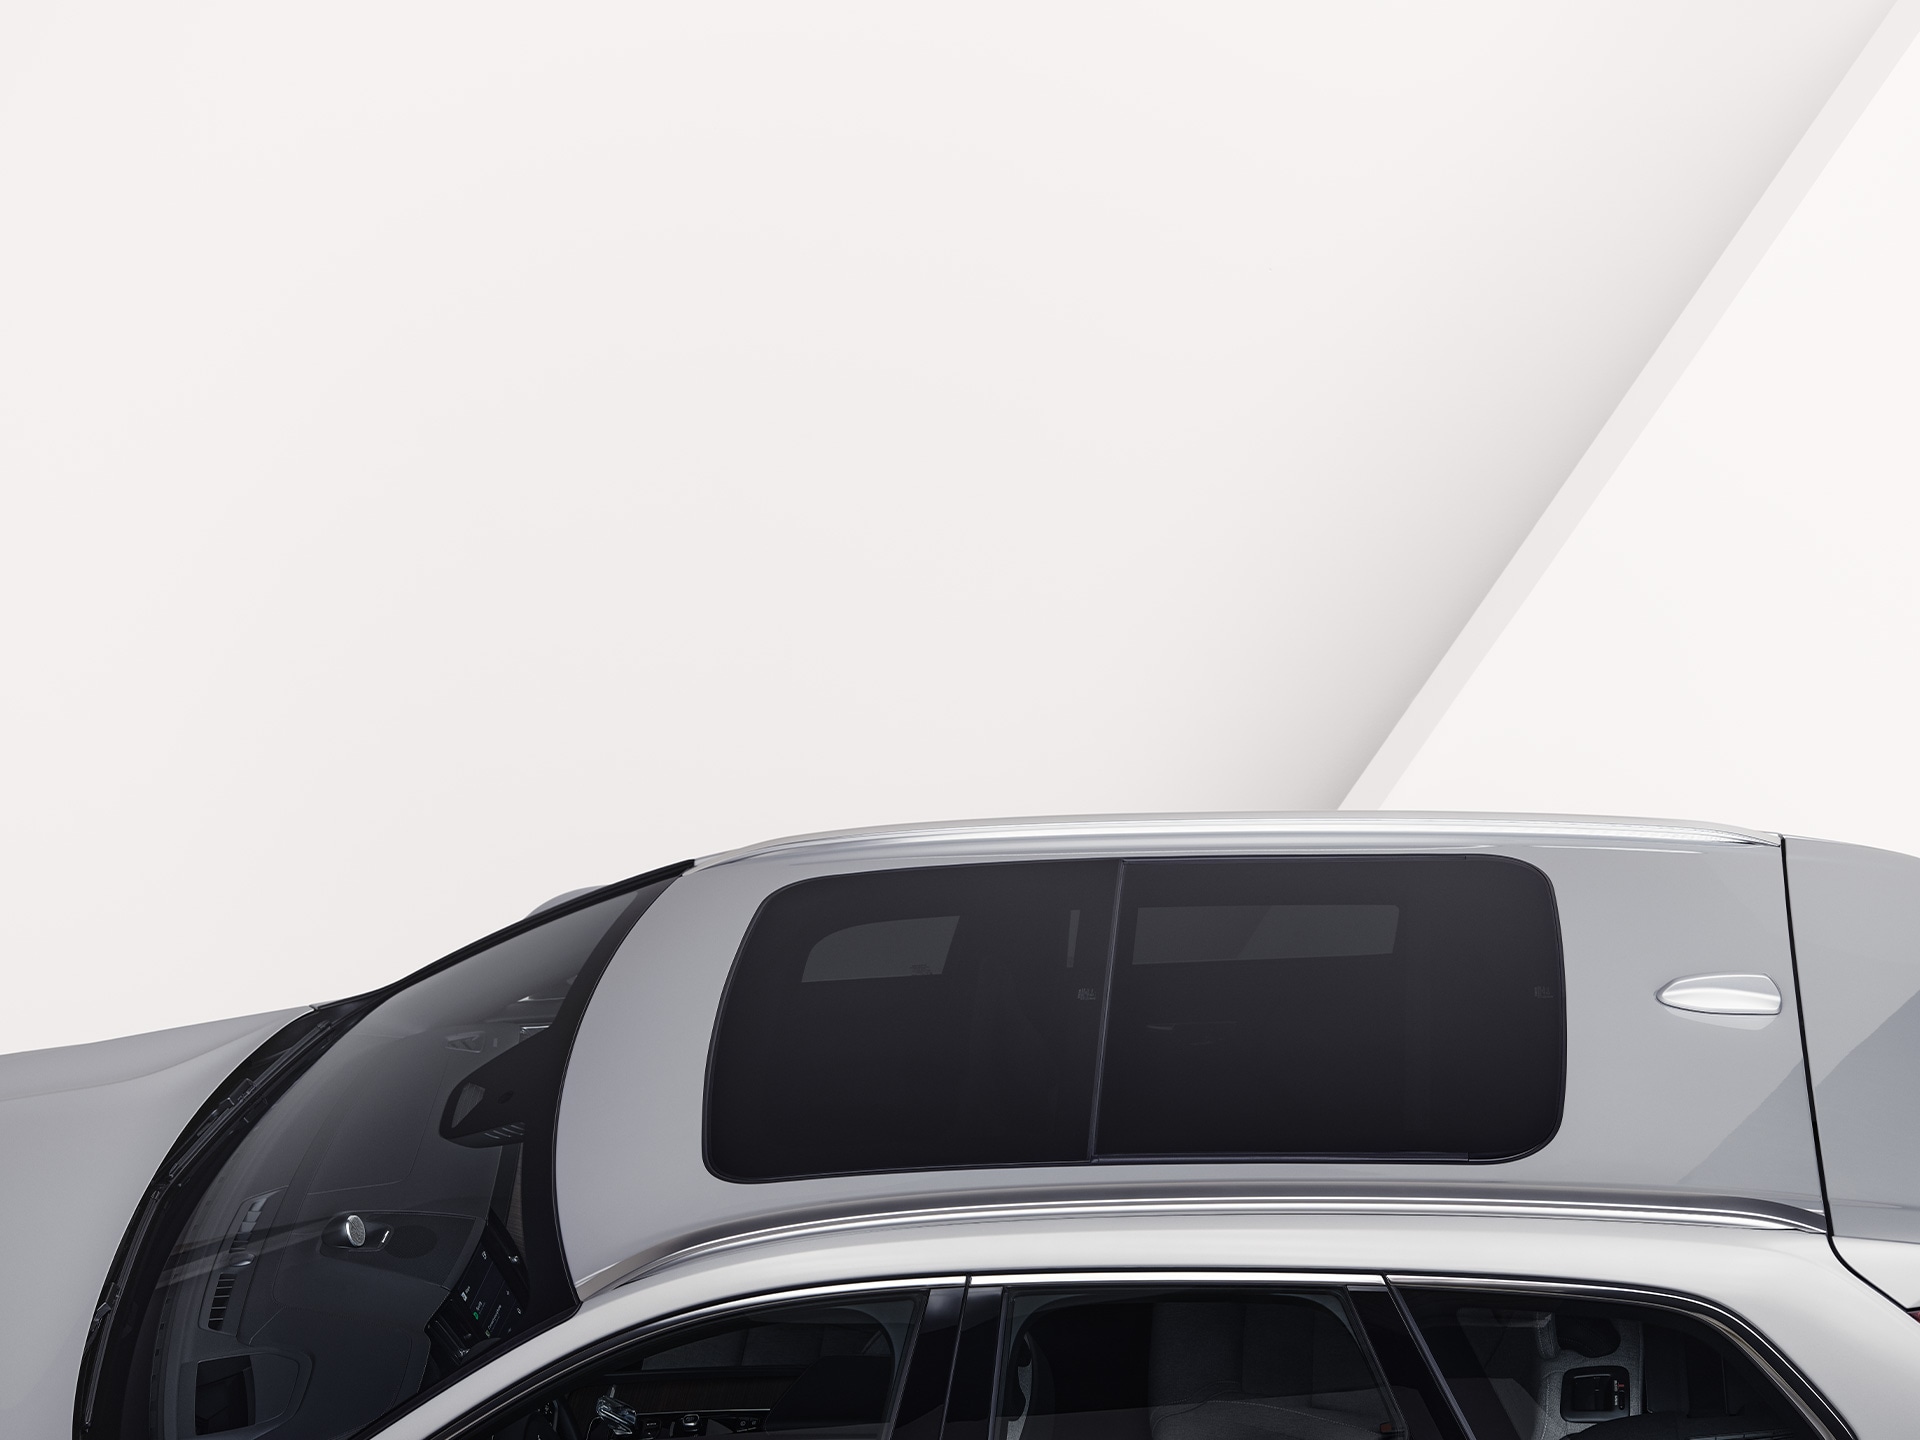 Panoramic roof on a Volvo XC60 SUV.